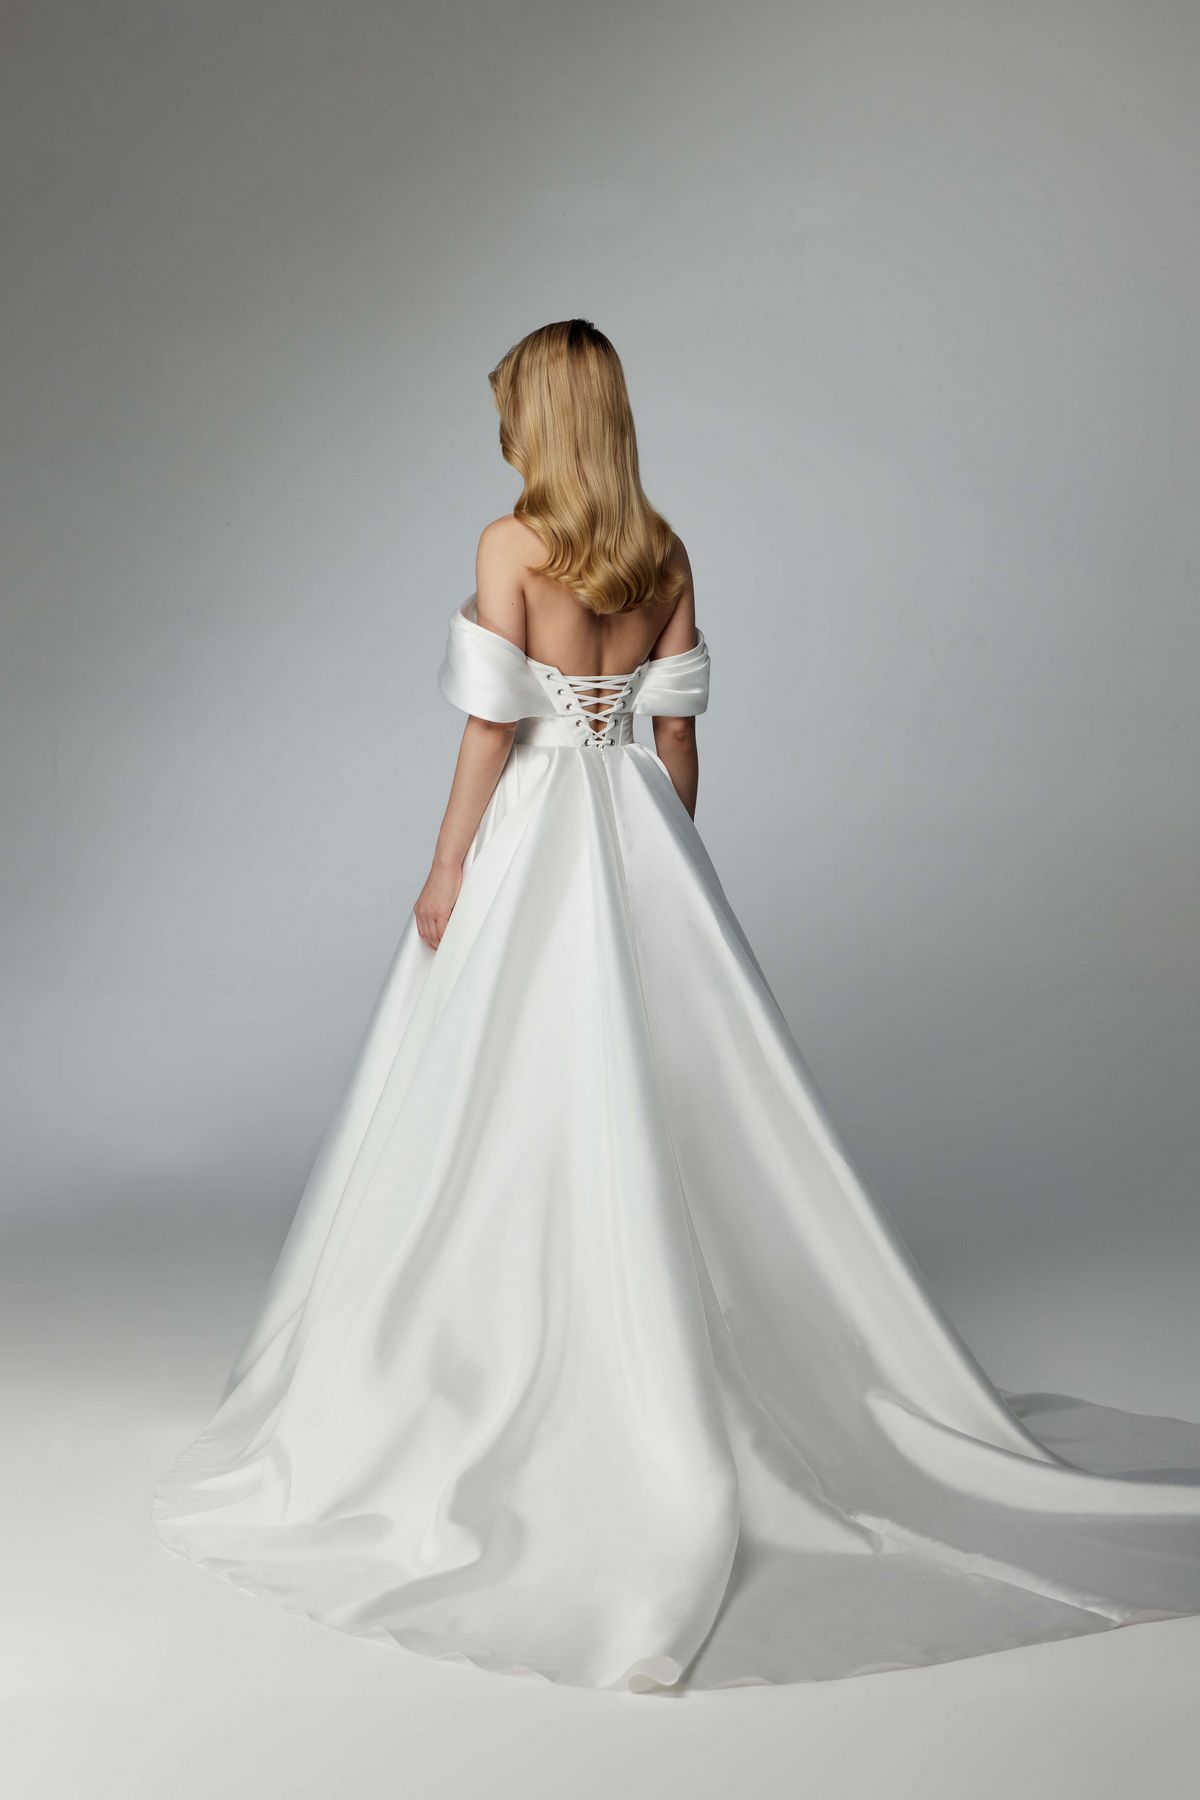 Simple elegant wedding dress with a long train and removable sleeves by ange etoiles. 1